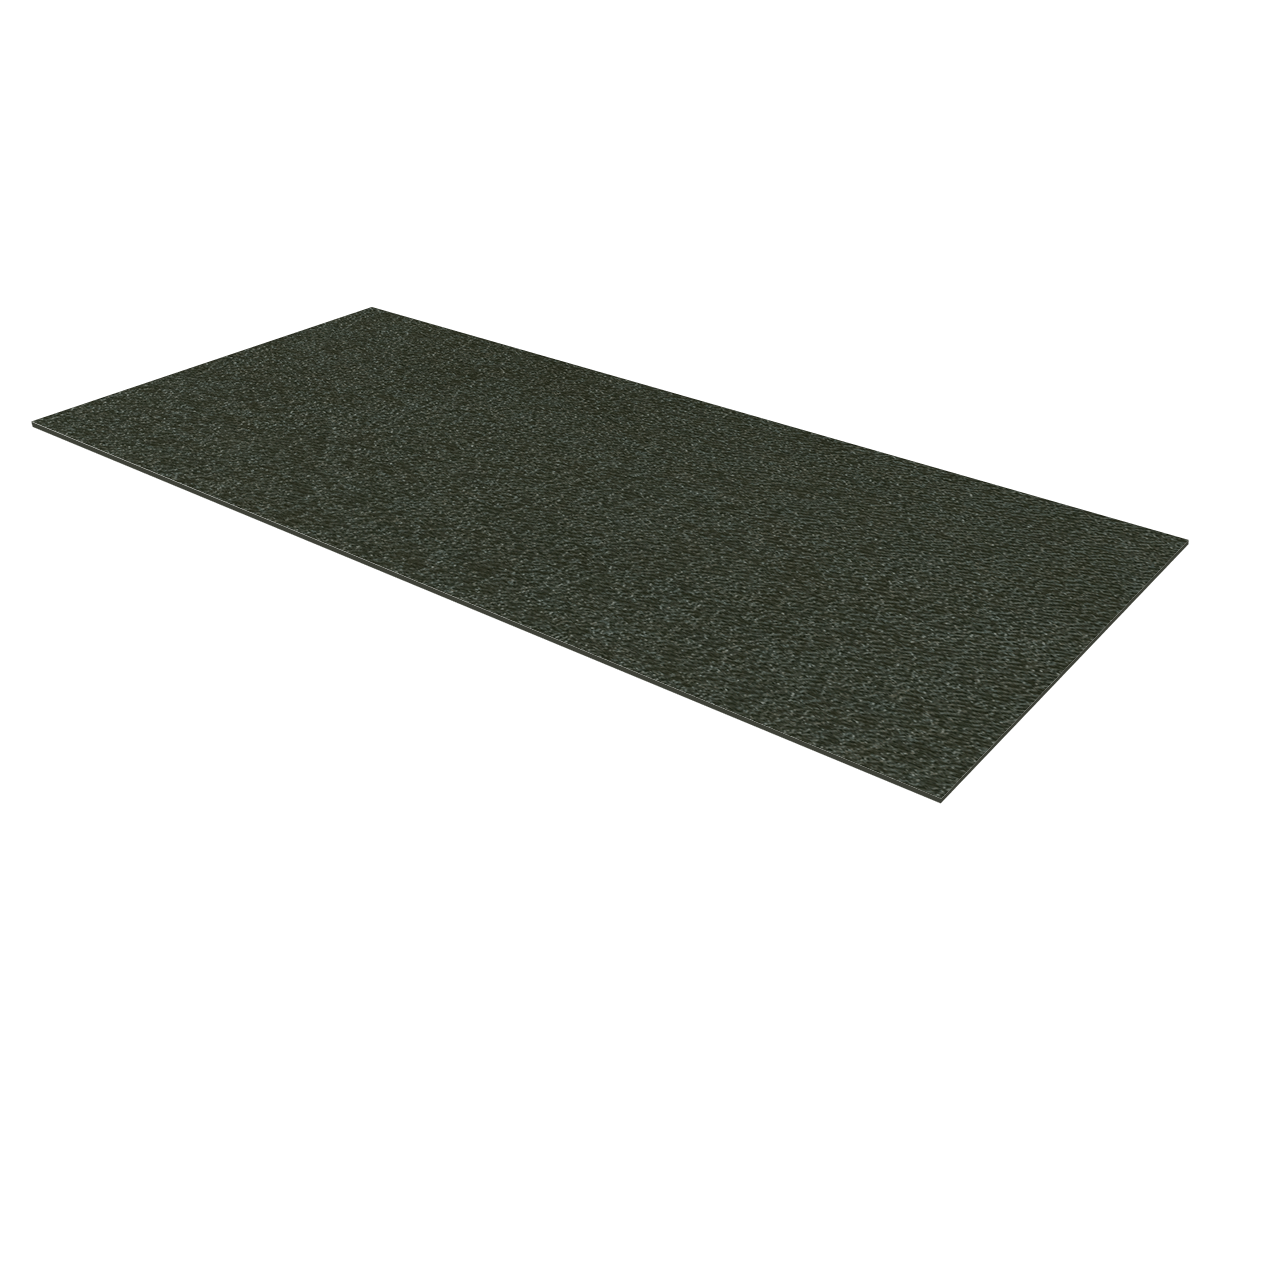 ABS Plastic Sheet - Olive Drab